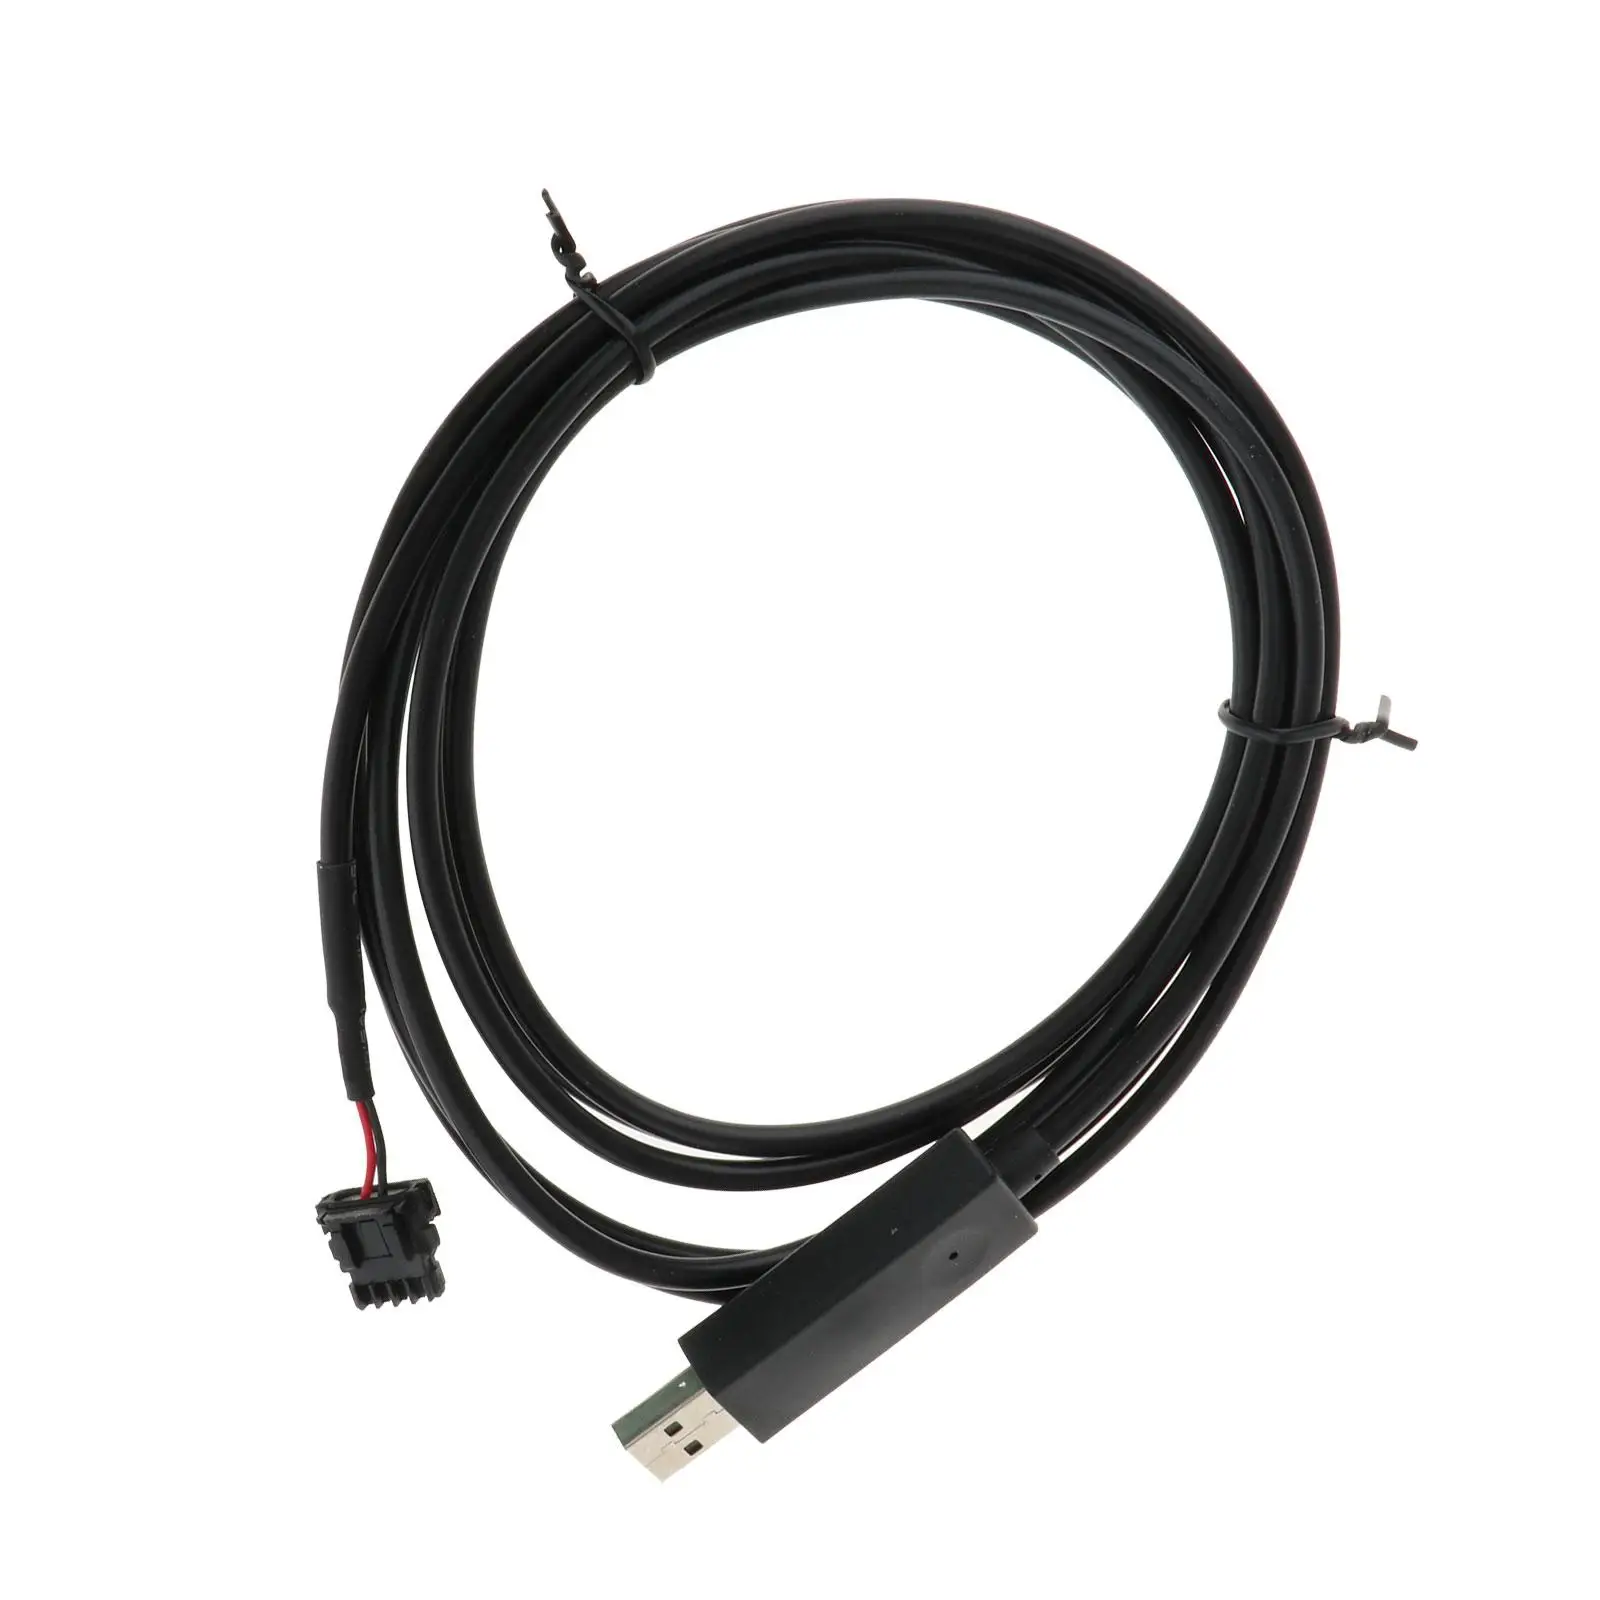 USB Can Cable 558-443 Double Ended Durable Repair Accessories Harness Y Splitter Cable for Holley Sniper Efi Erminator x